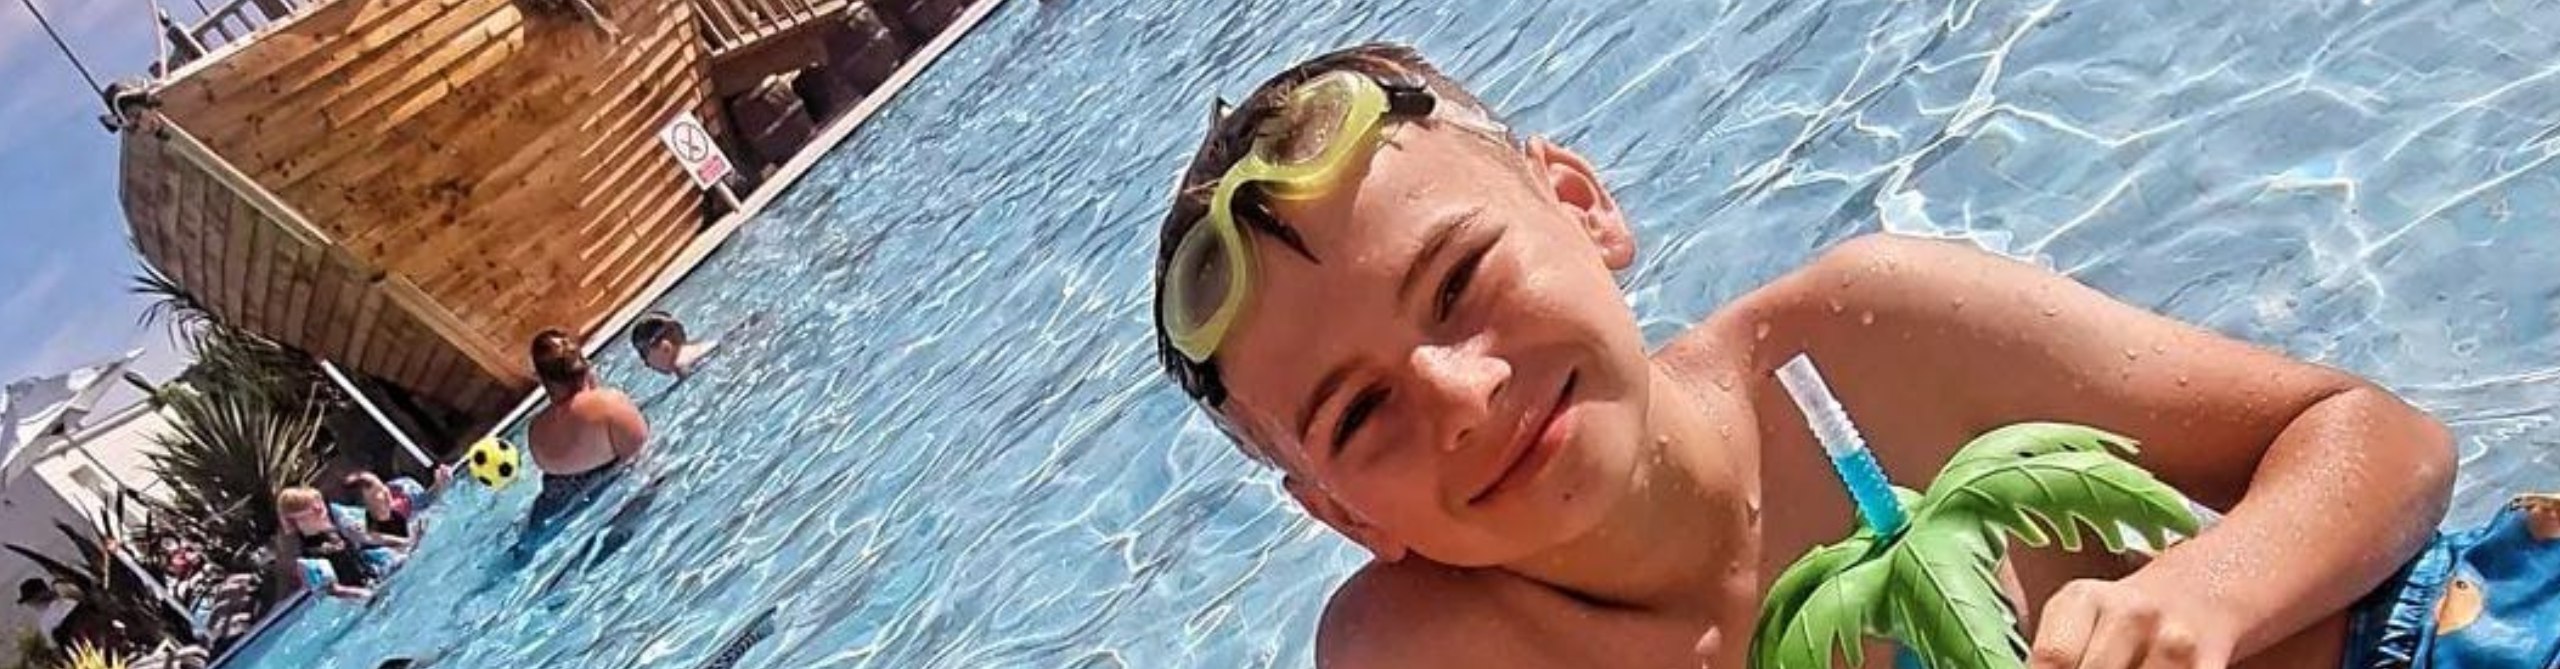 A young boy wearing goggles and a swimming tube, smiling broadly in a sunlit pool at a holiday home with other swimmers and a wooden structure in the background.